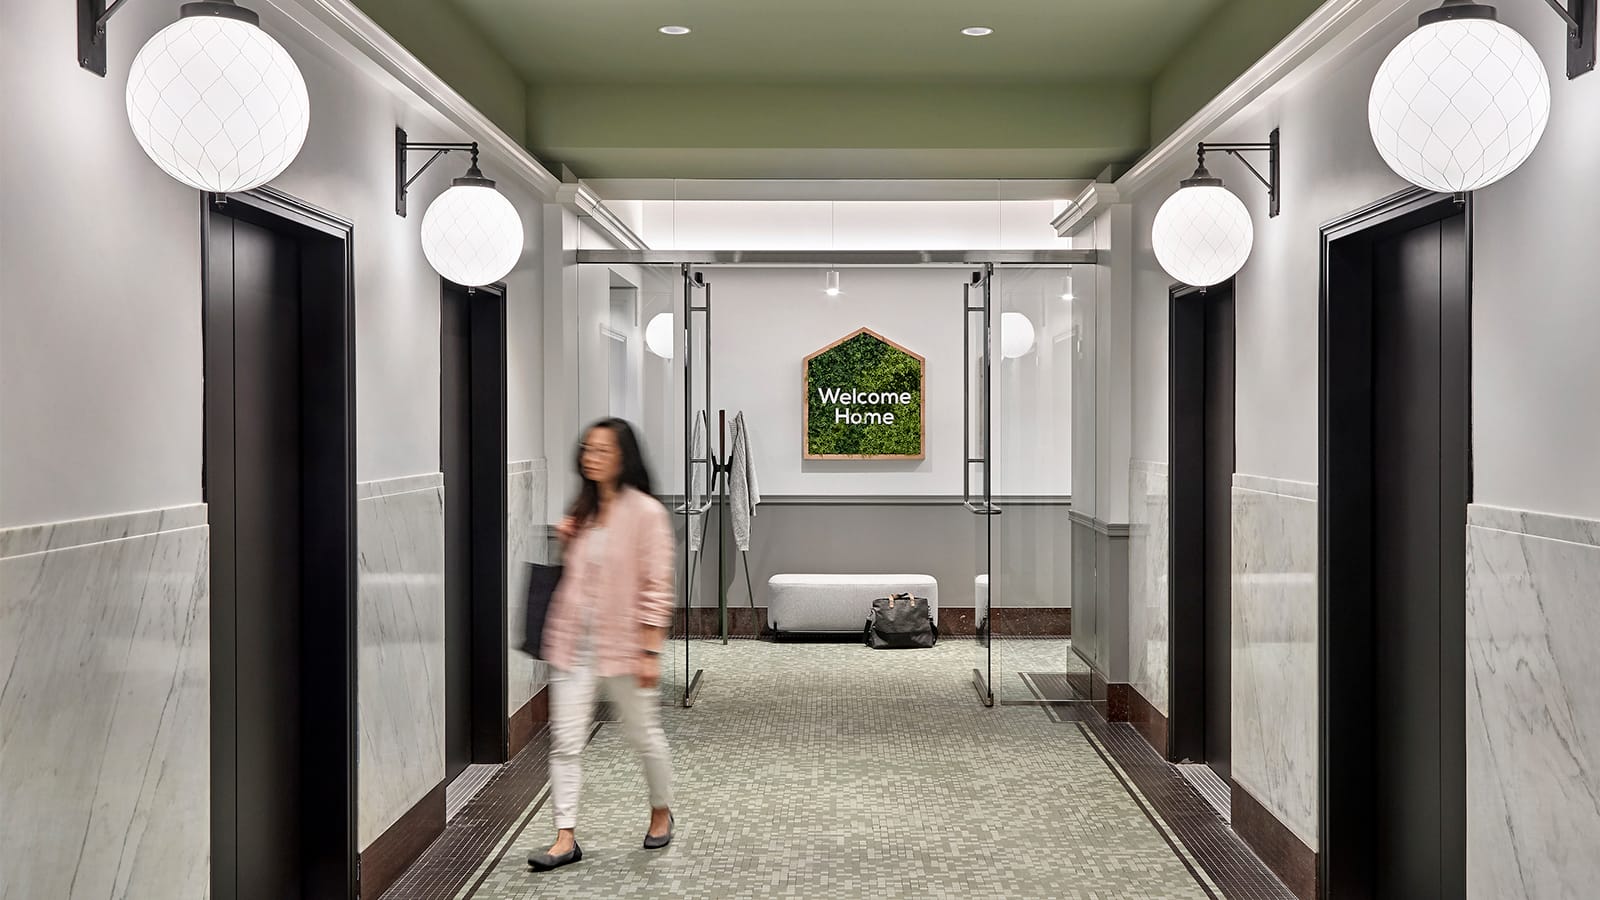 The Elevator Lobby at Home Chef's Chicago headquarters